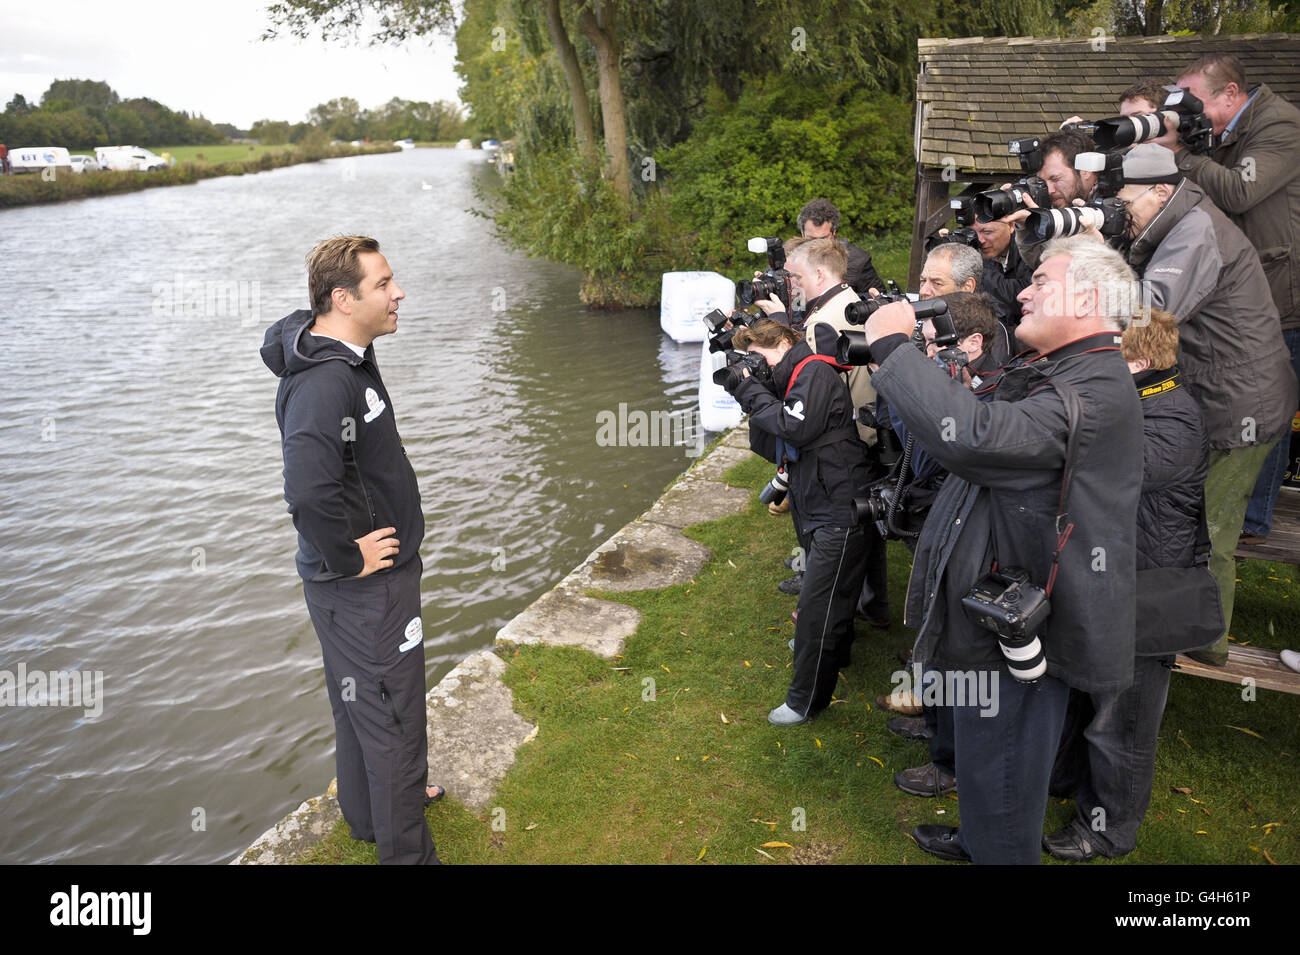 David Walliams stands in front of members of the media on the bank of the River Thames in Lechlade, Gloucestershire, before setting off on his attempt to swim the entire length of the River to raise money for Sport Relief. Stock Photo